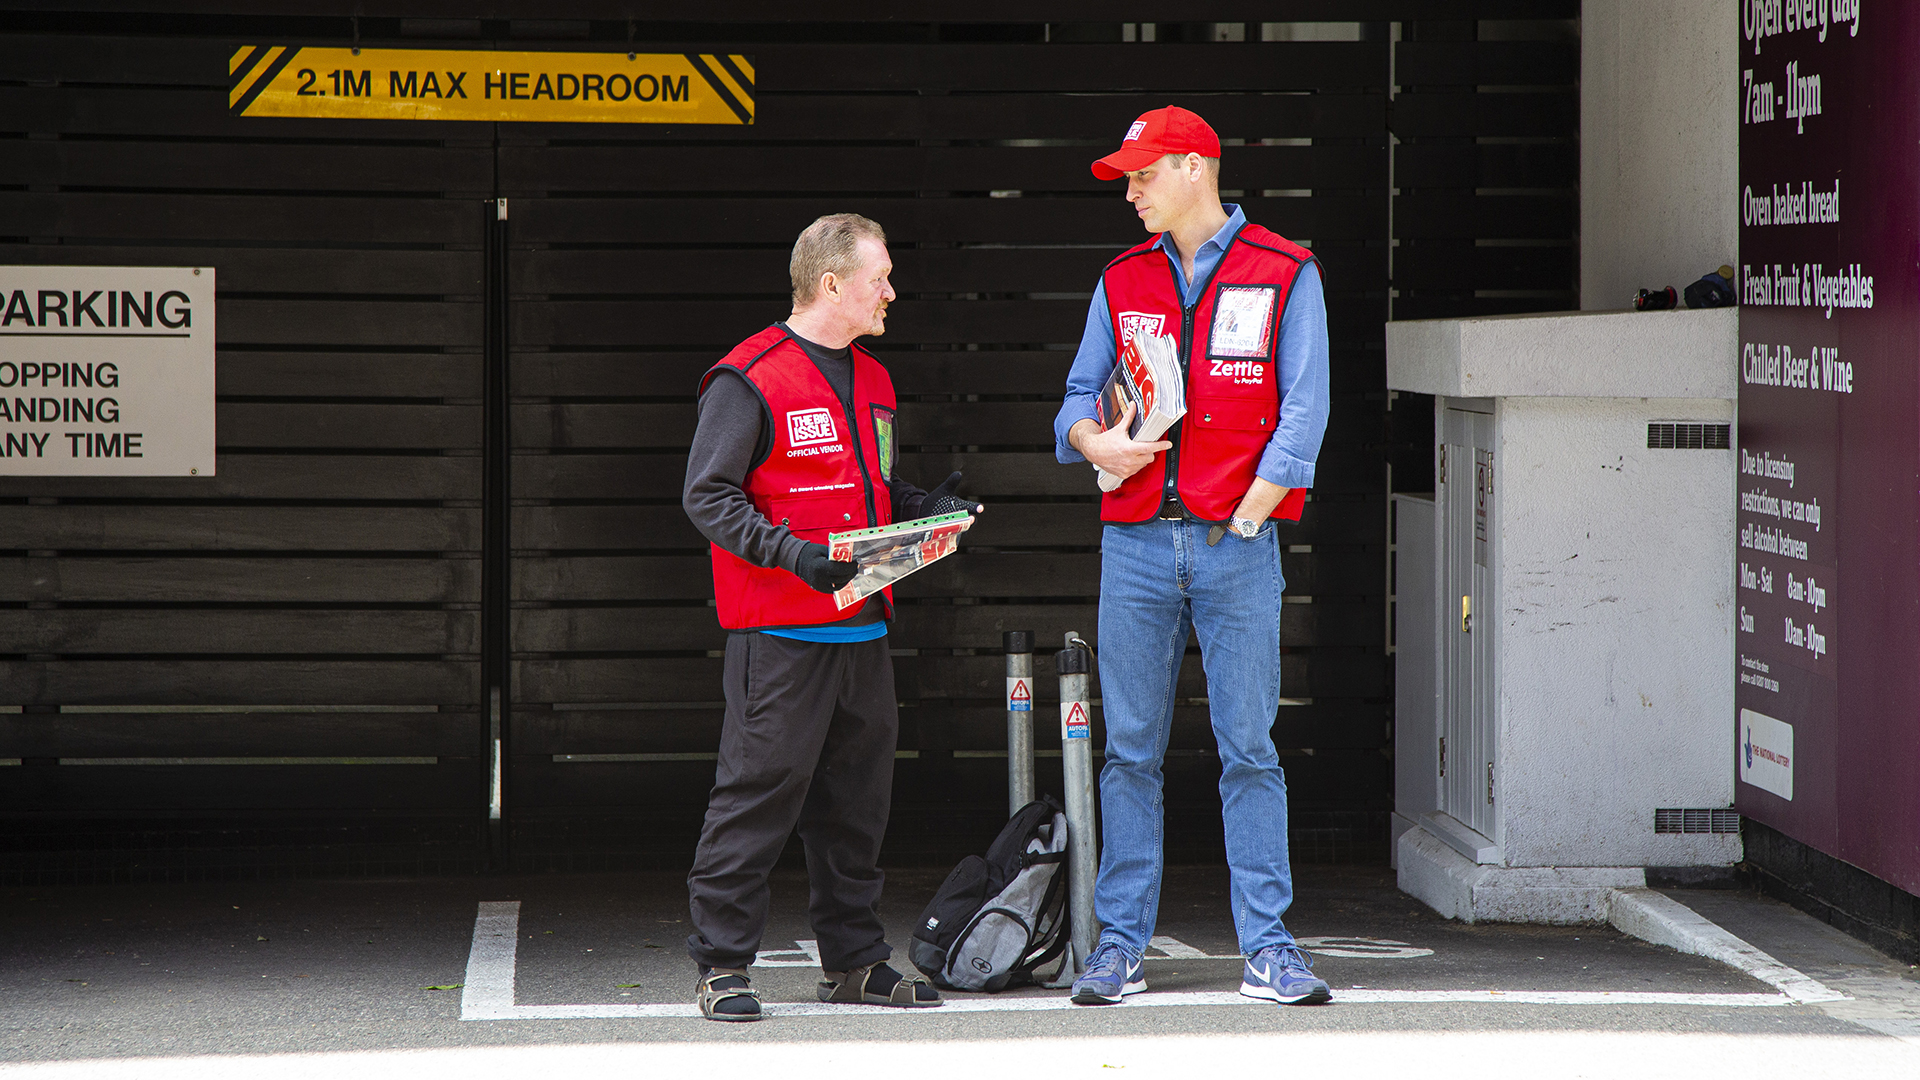 Dave and Prince William on their pitch selling The Big Issue Photo: Andy Parsons